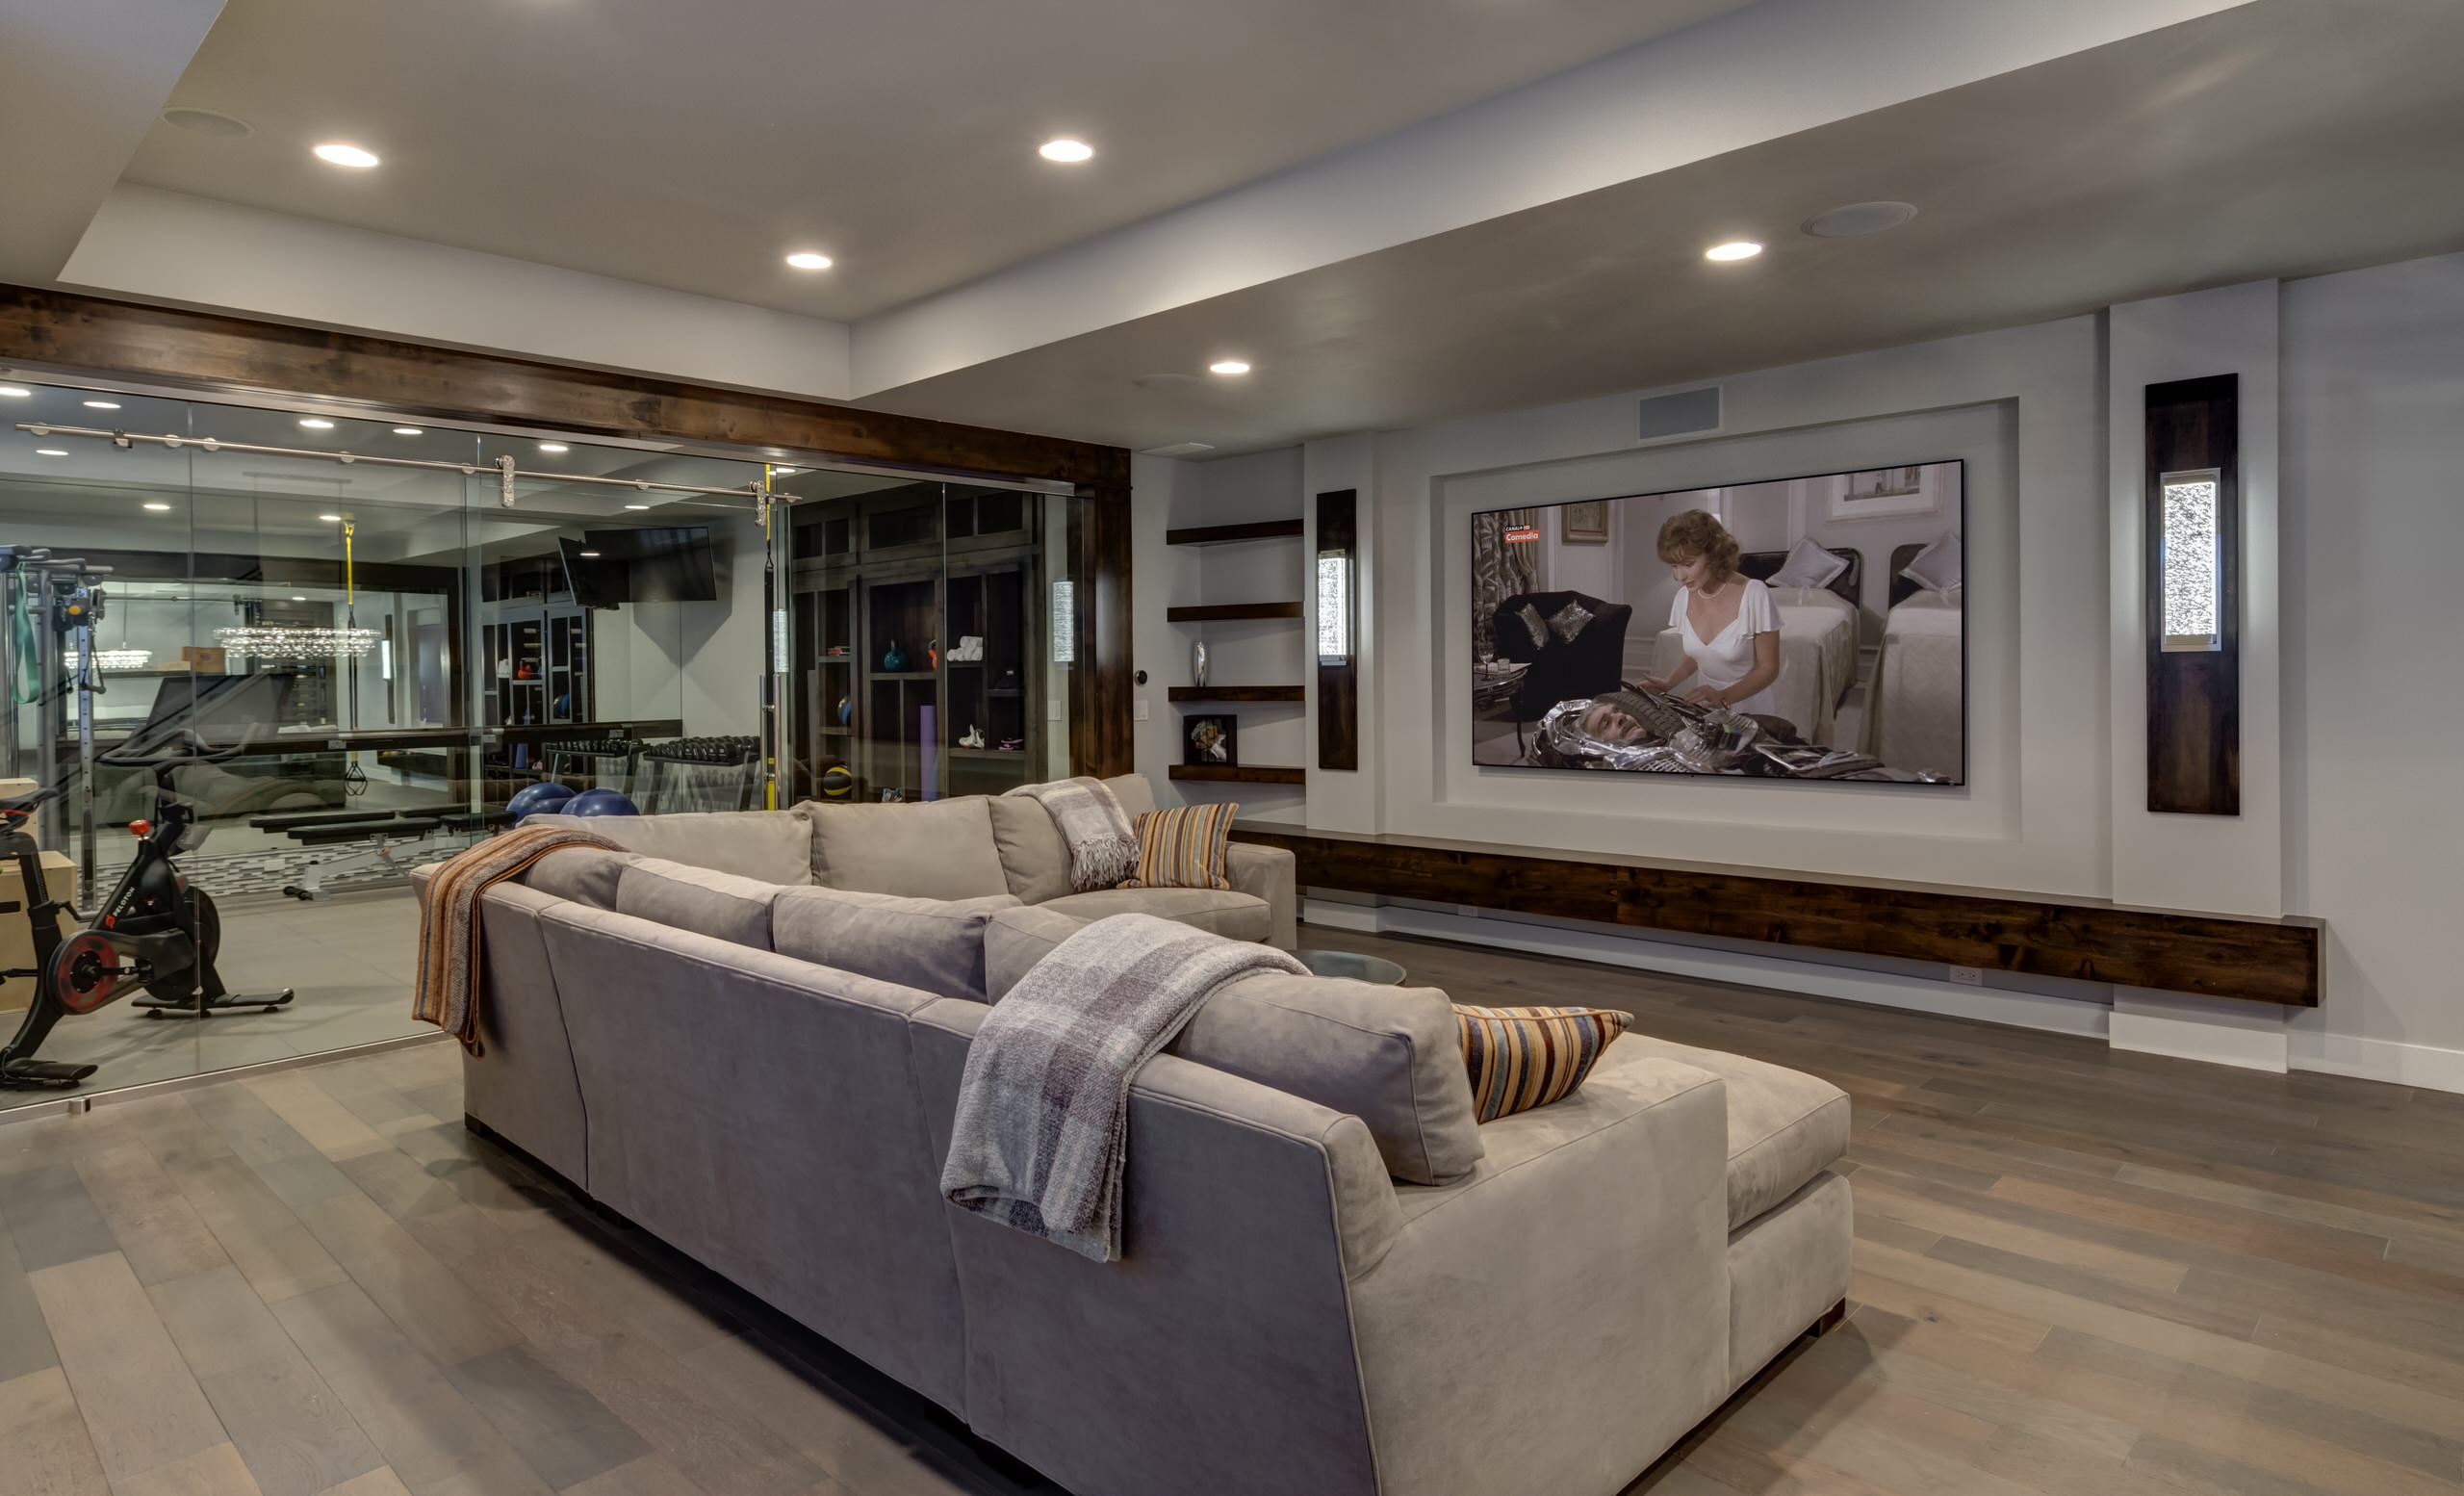 75 Beautiful Basement Pictures Ideas January